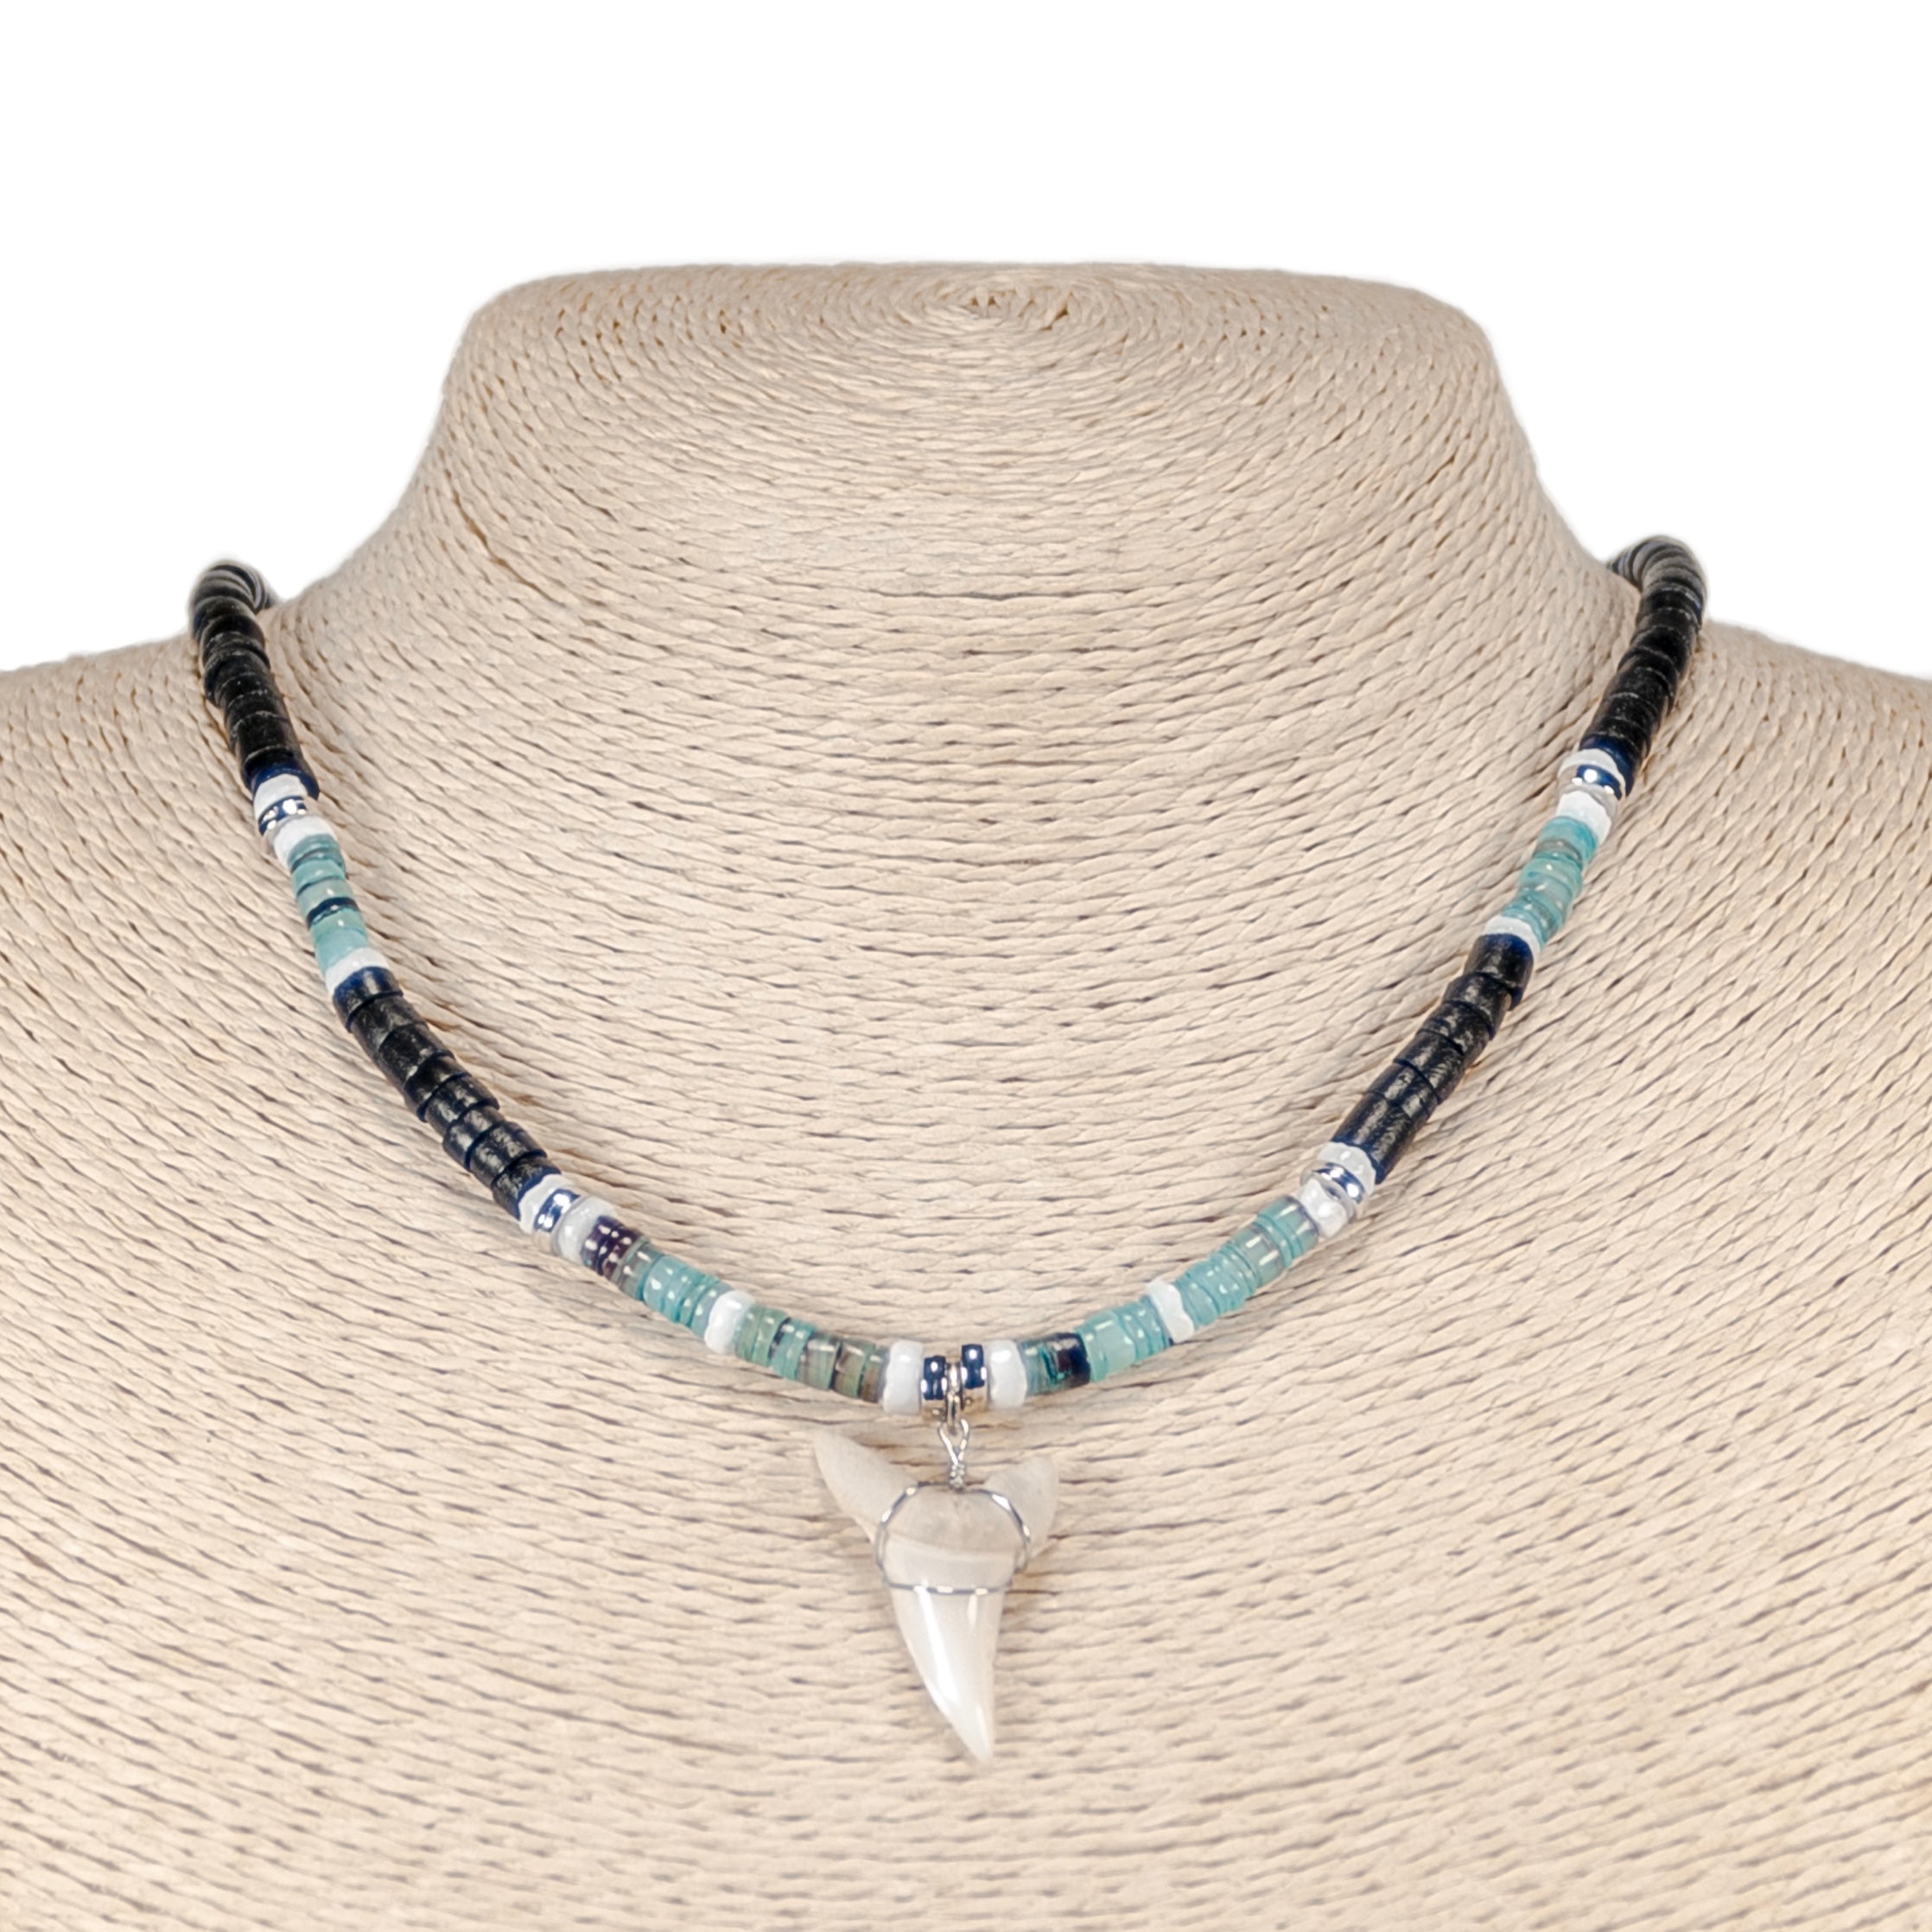 Mako Shark Tooth Pendant on Black Coconut & Green Shell Beads Necklace